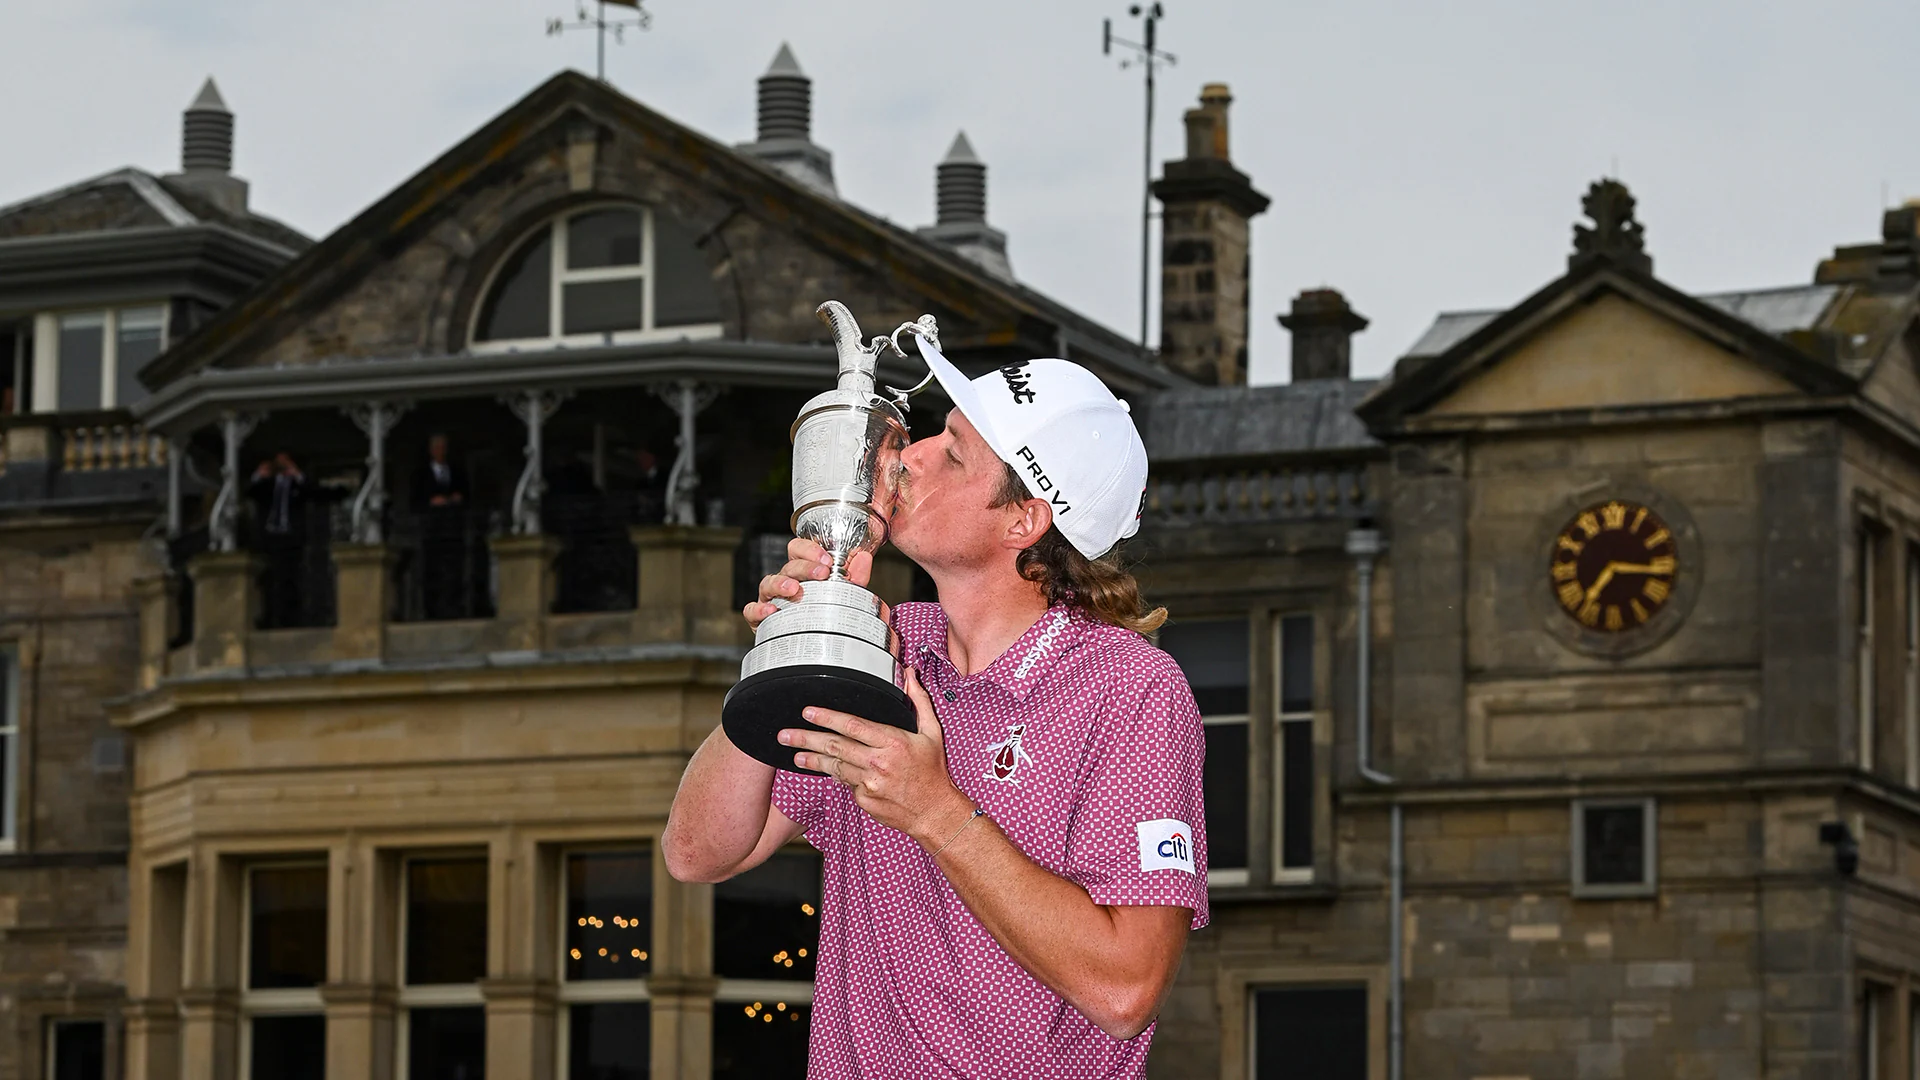 2022 British Open: Historic finish leaves Smith kissing what could’ve been Rory’s McIlroy claret jug